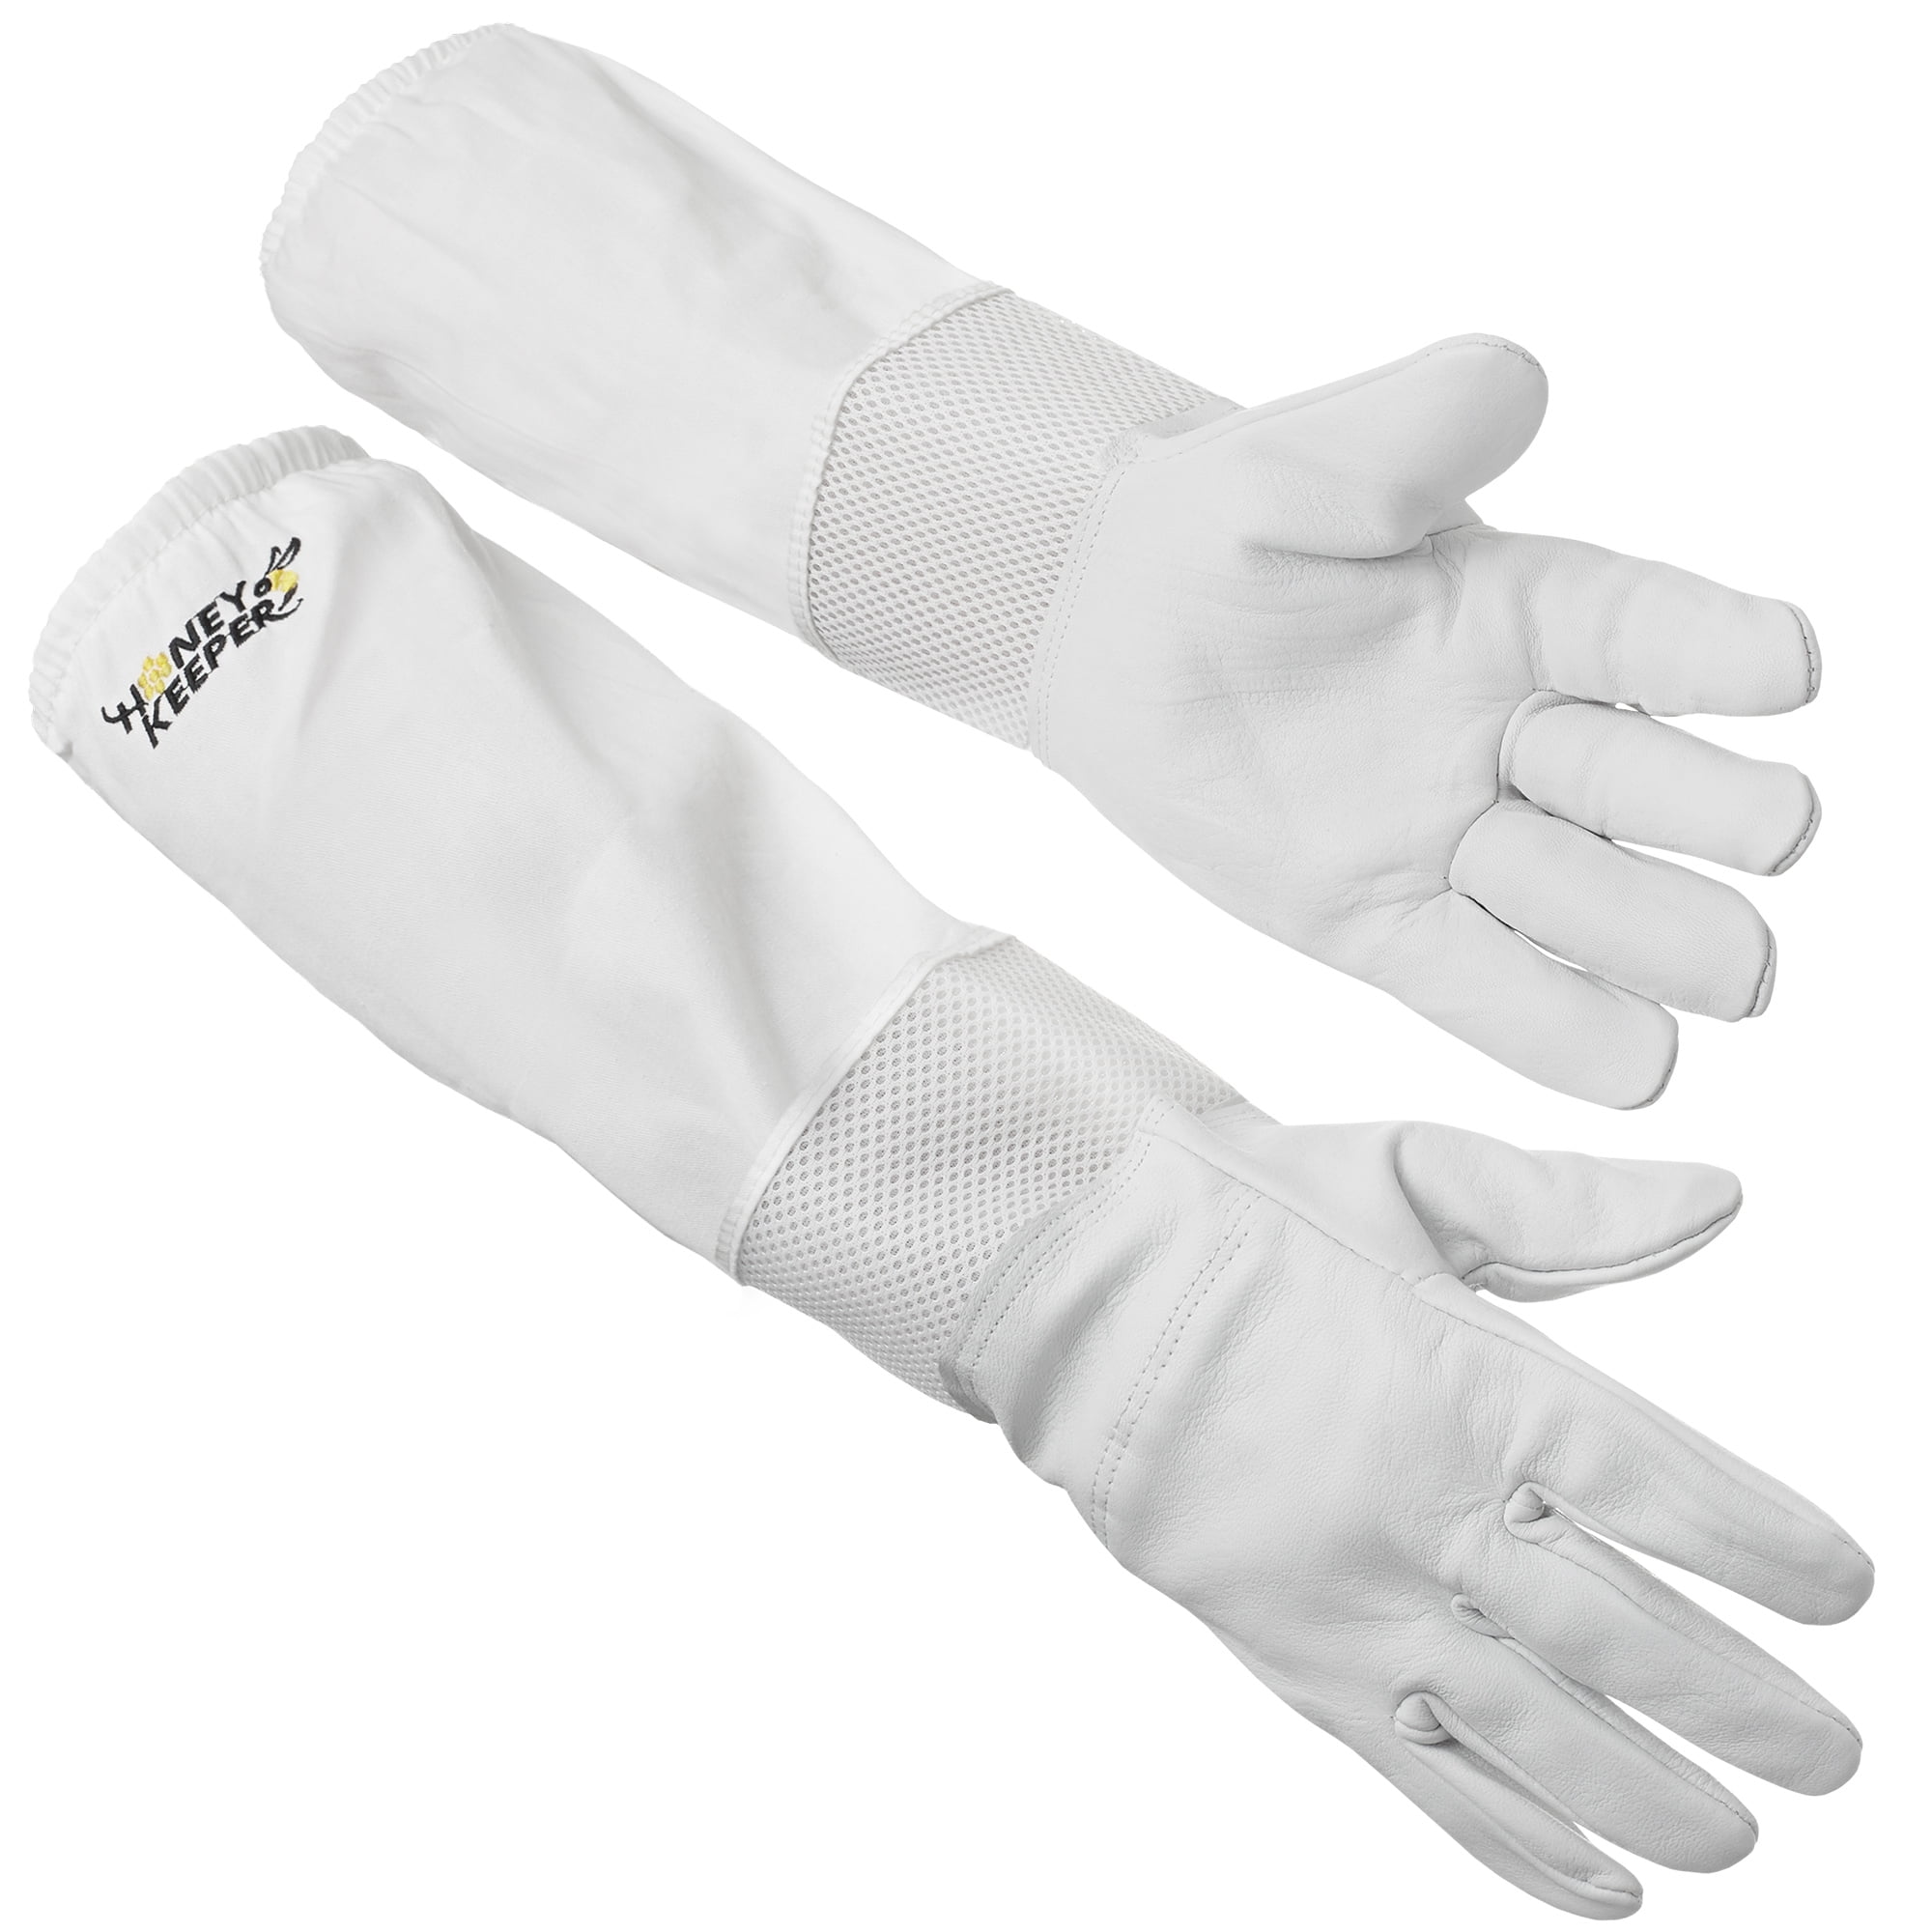 Beekeepers Yellow Fencing Basic Suit White Gloves Sets Choose Your Size 